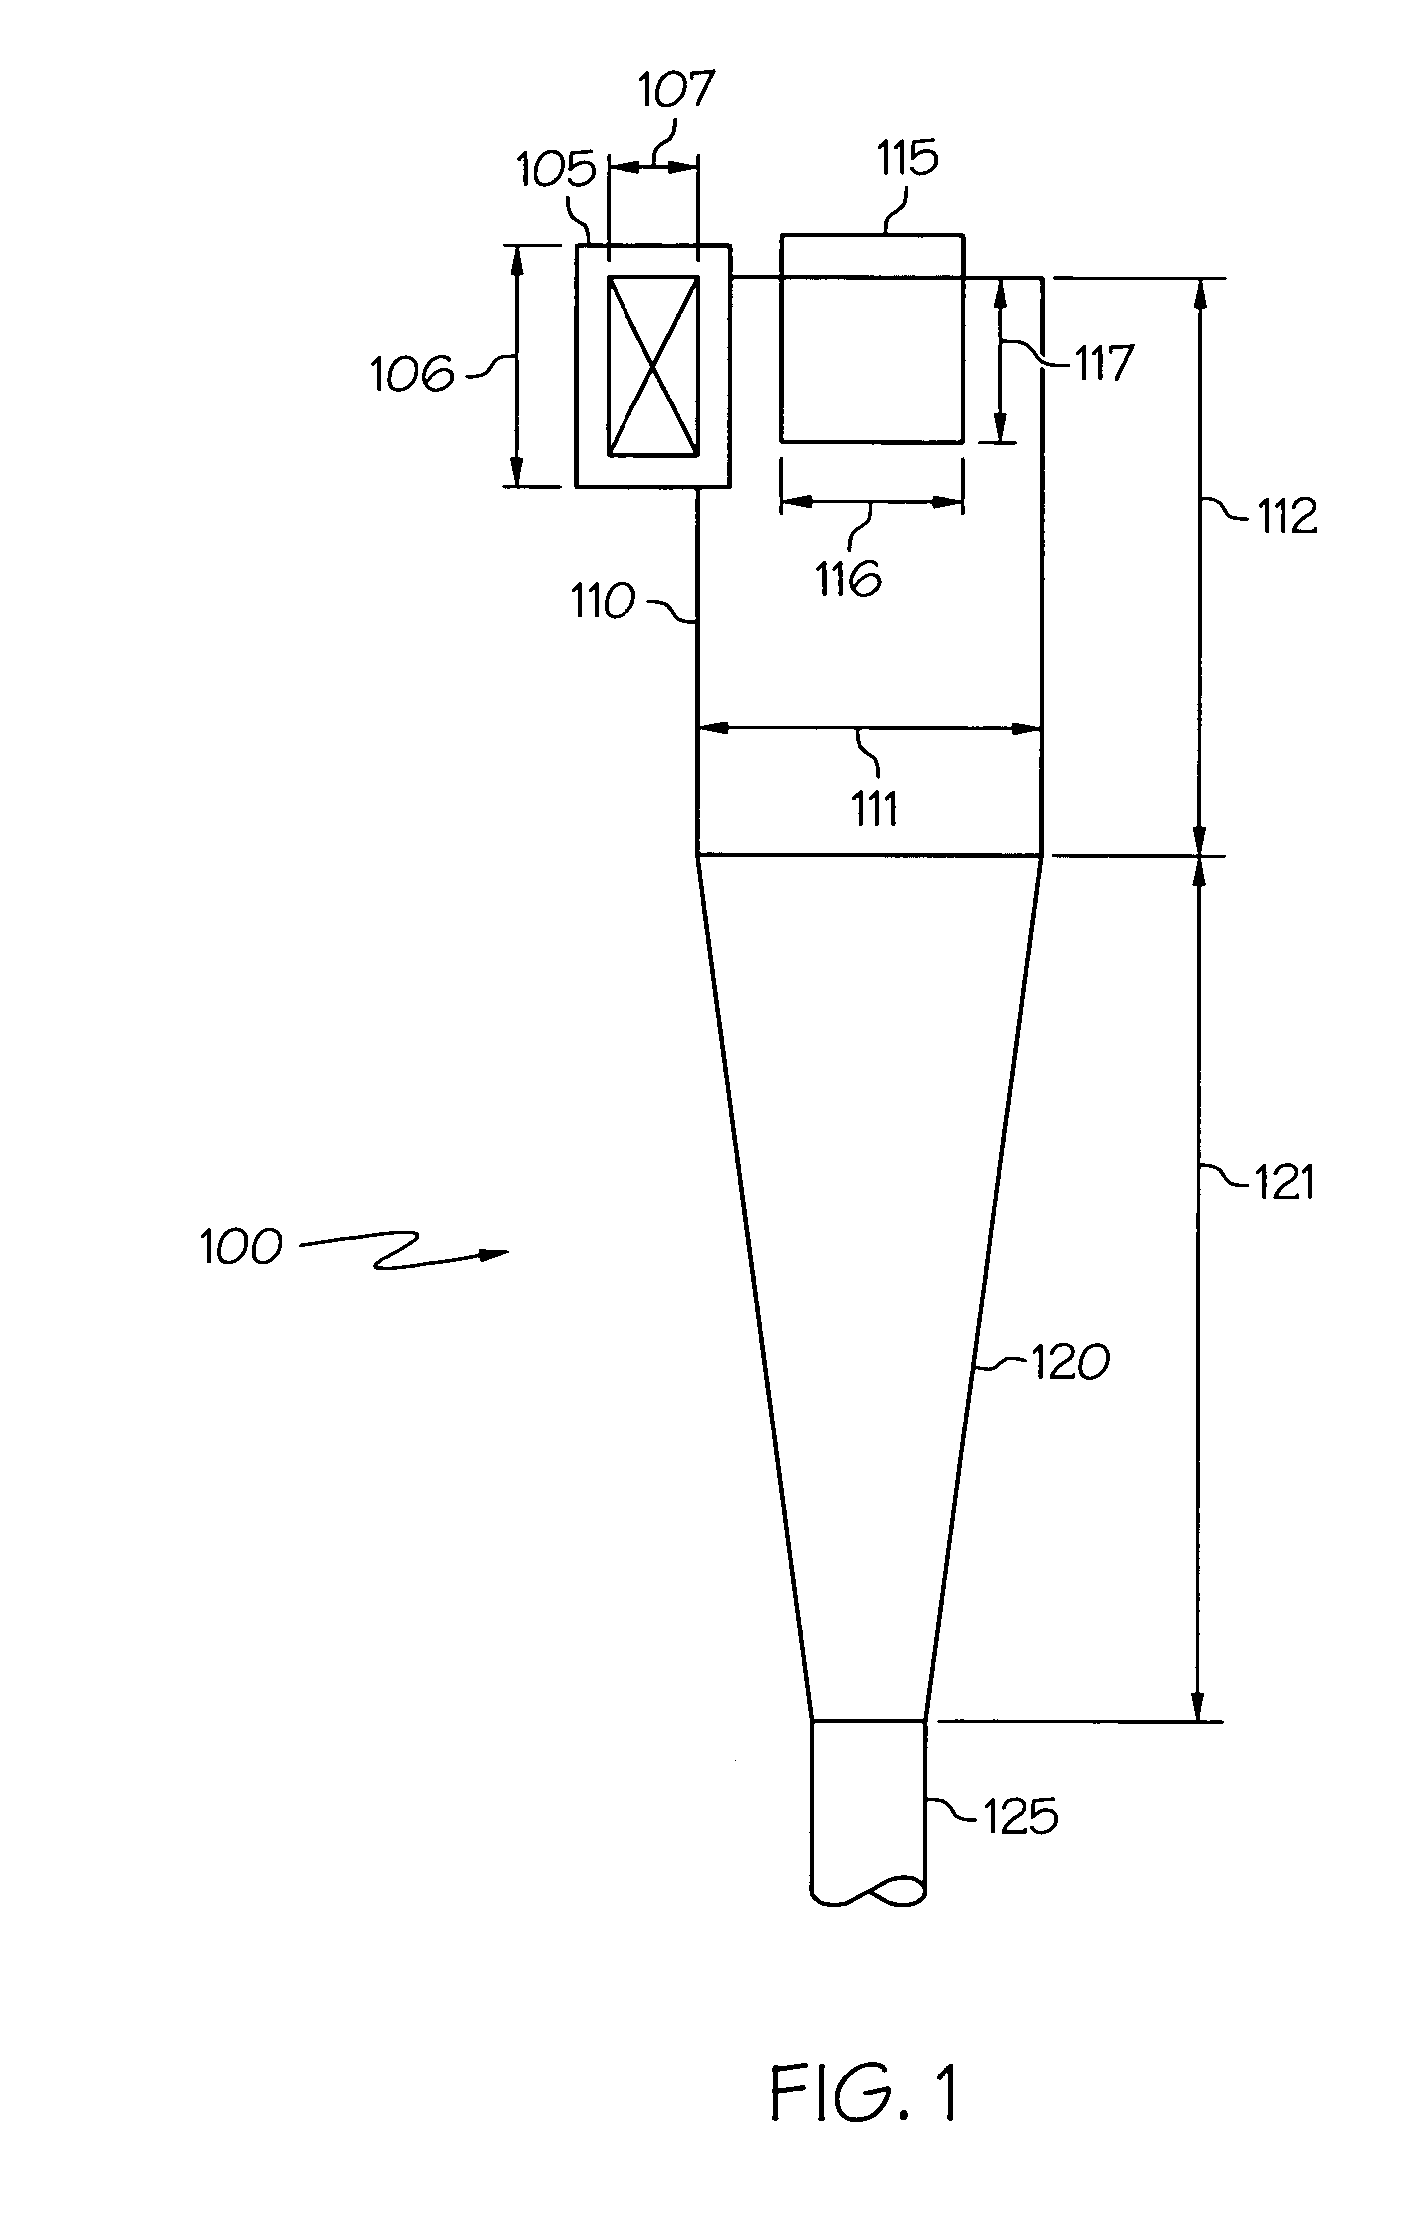 Process for removing solid particles from a gas-solids flow